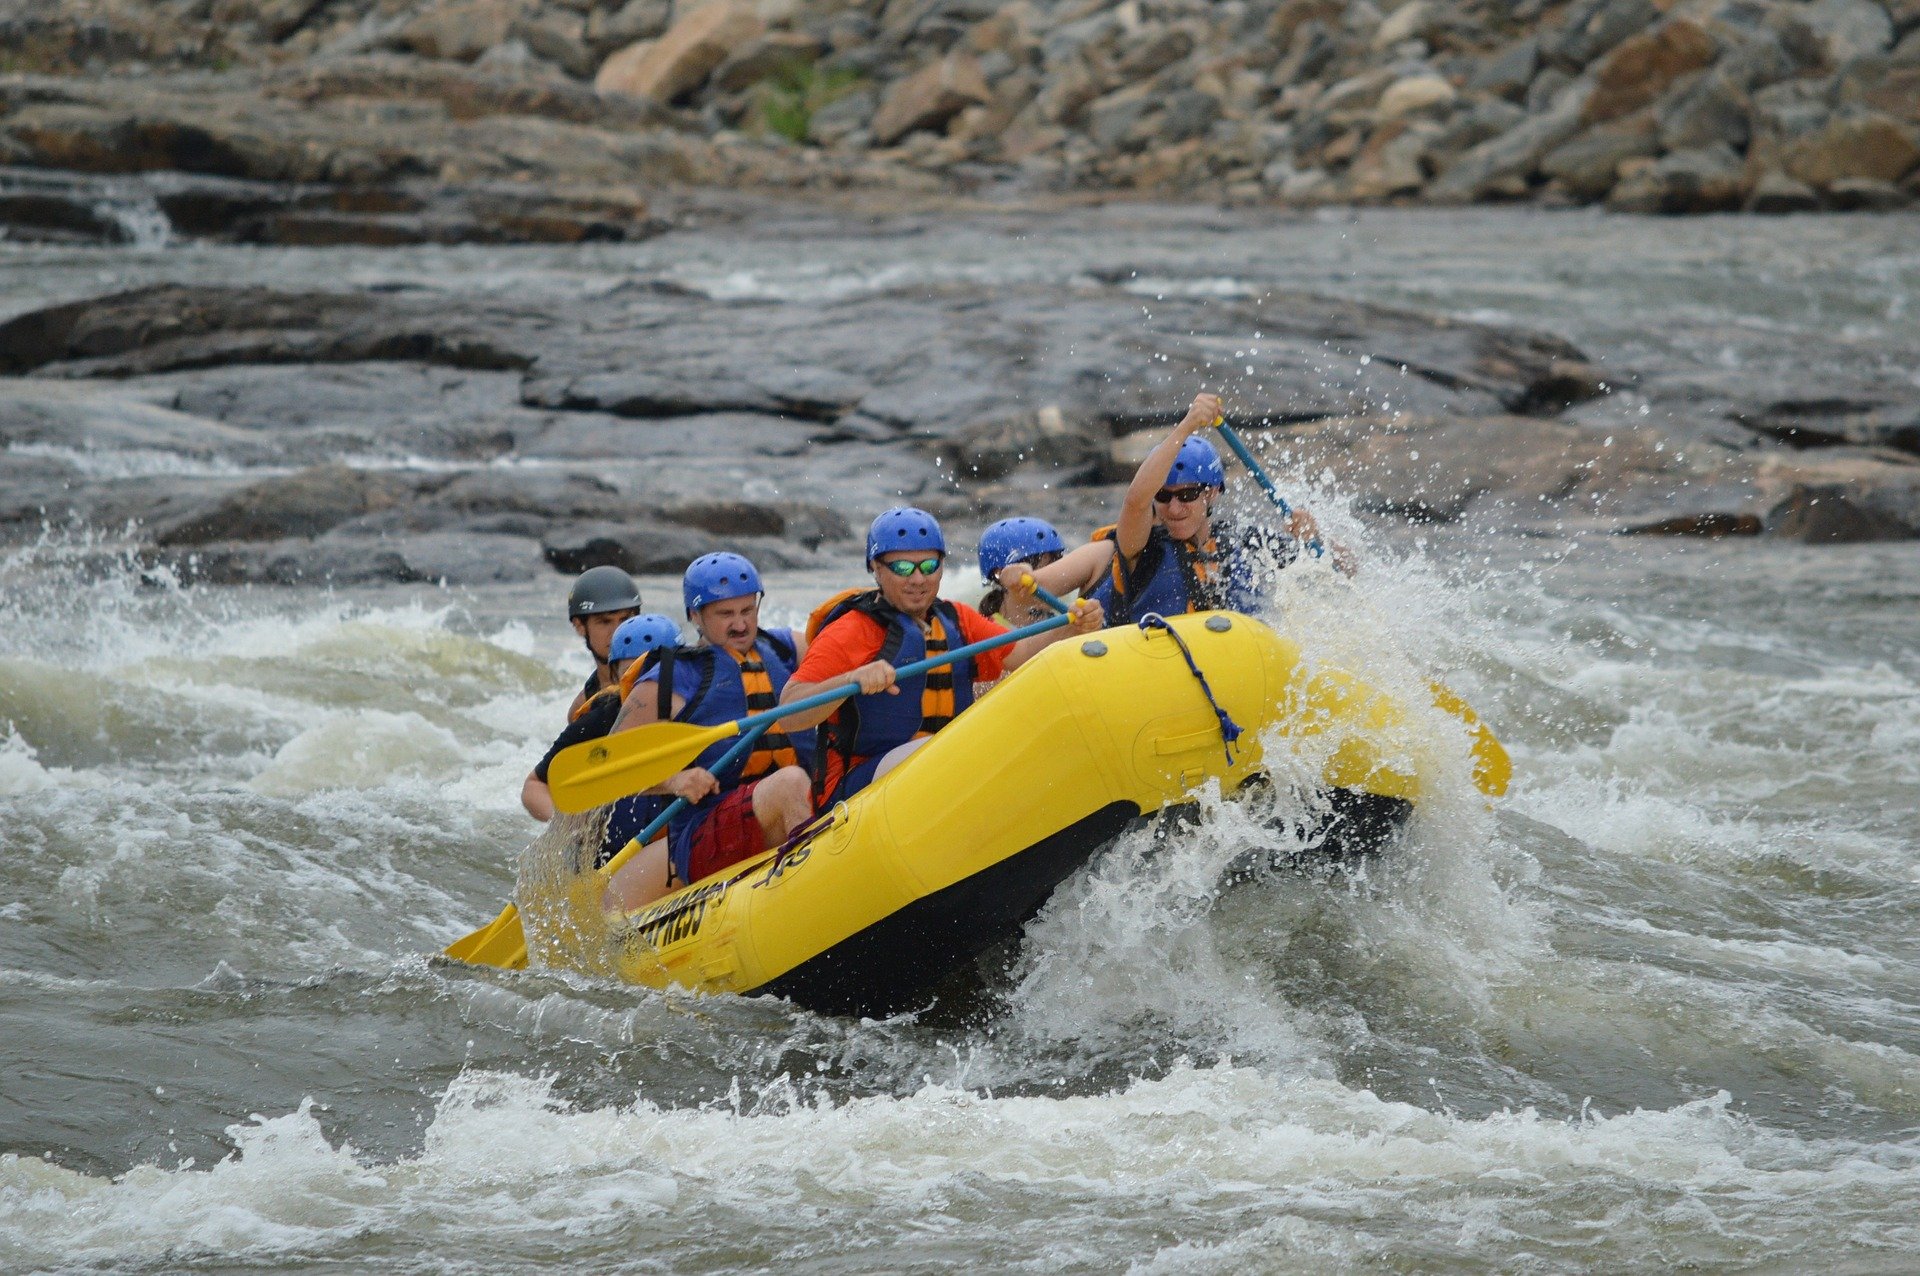 A group of people whitewater rafting on a river going up against waves of water.